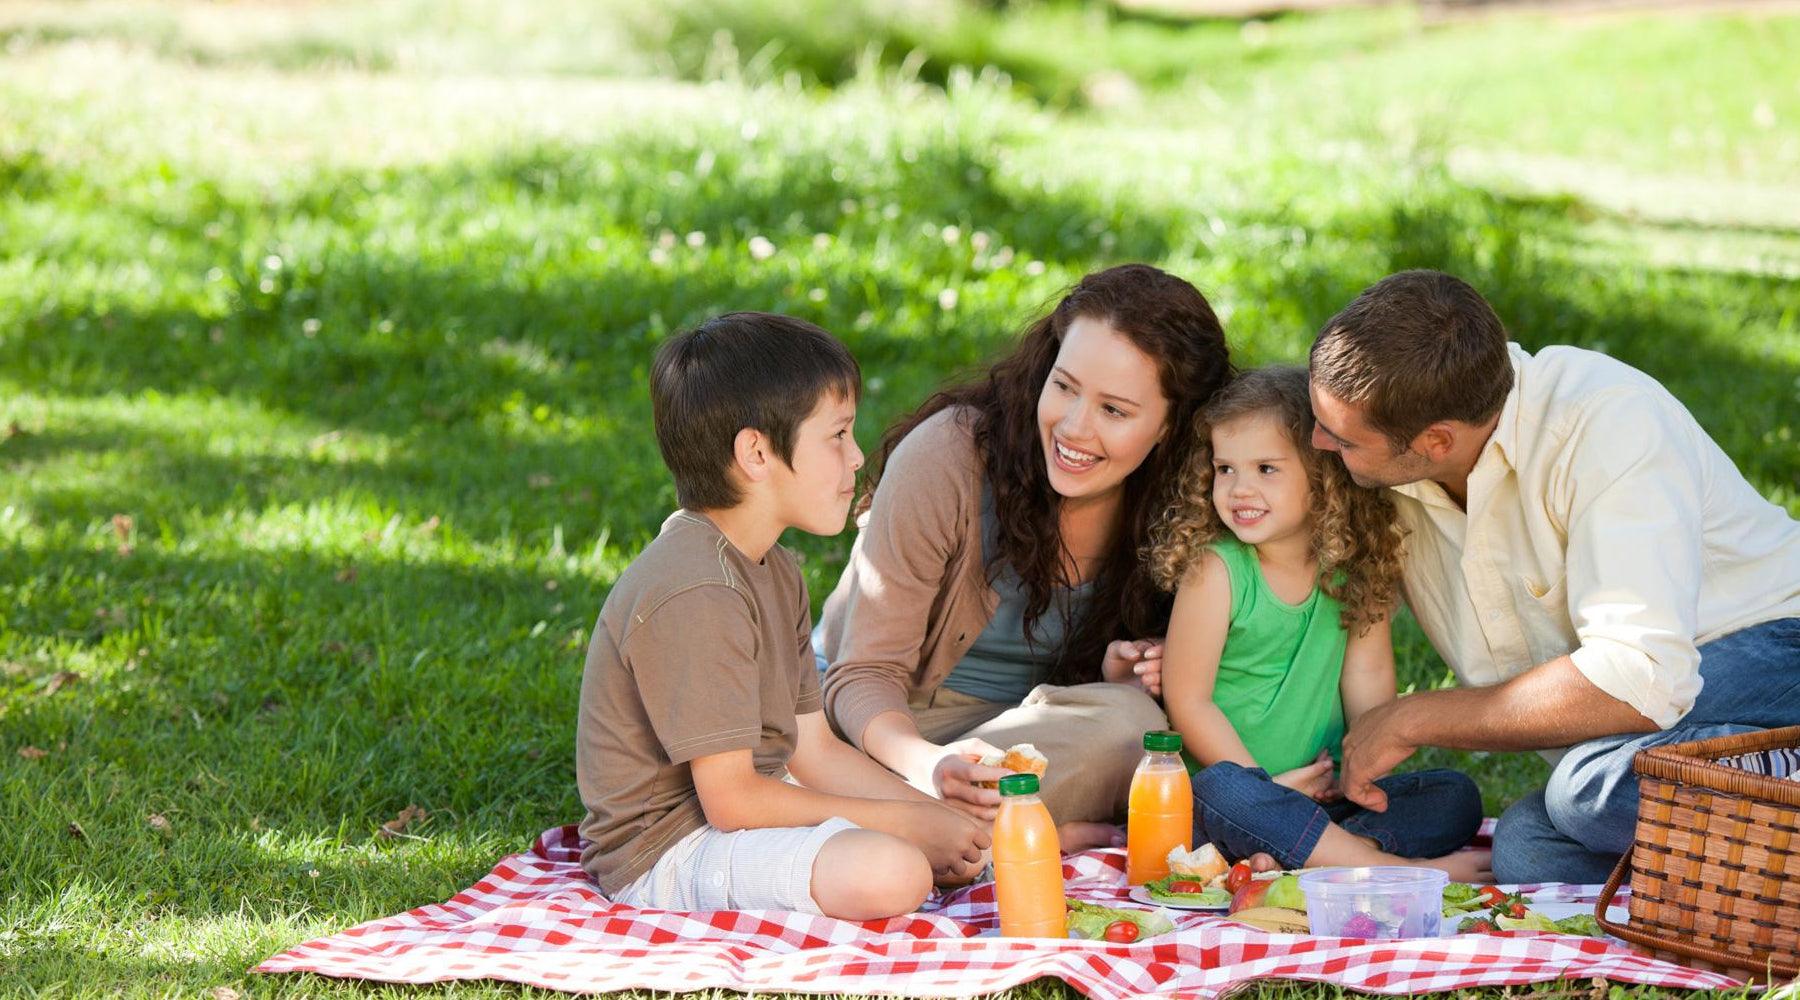 Planning your Family Picnic - The Essentials